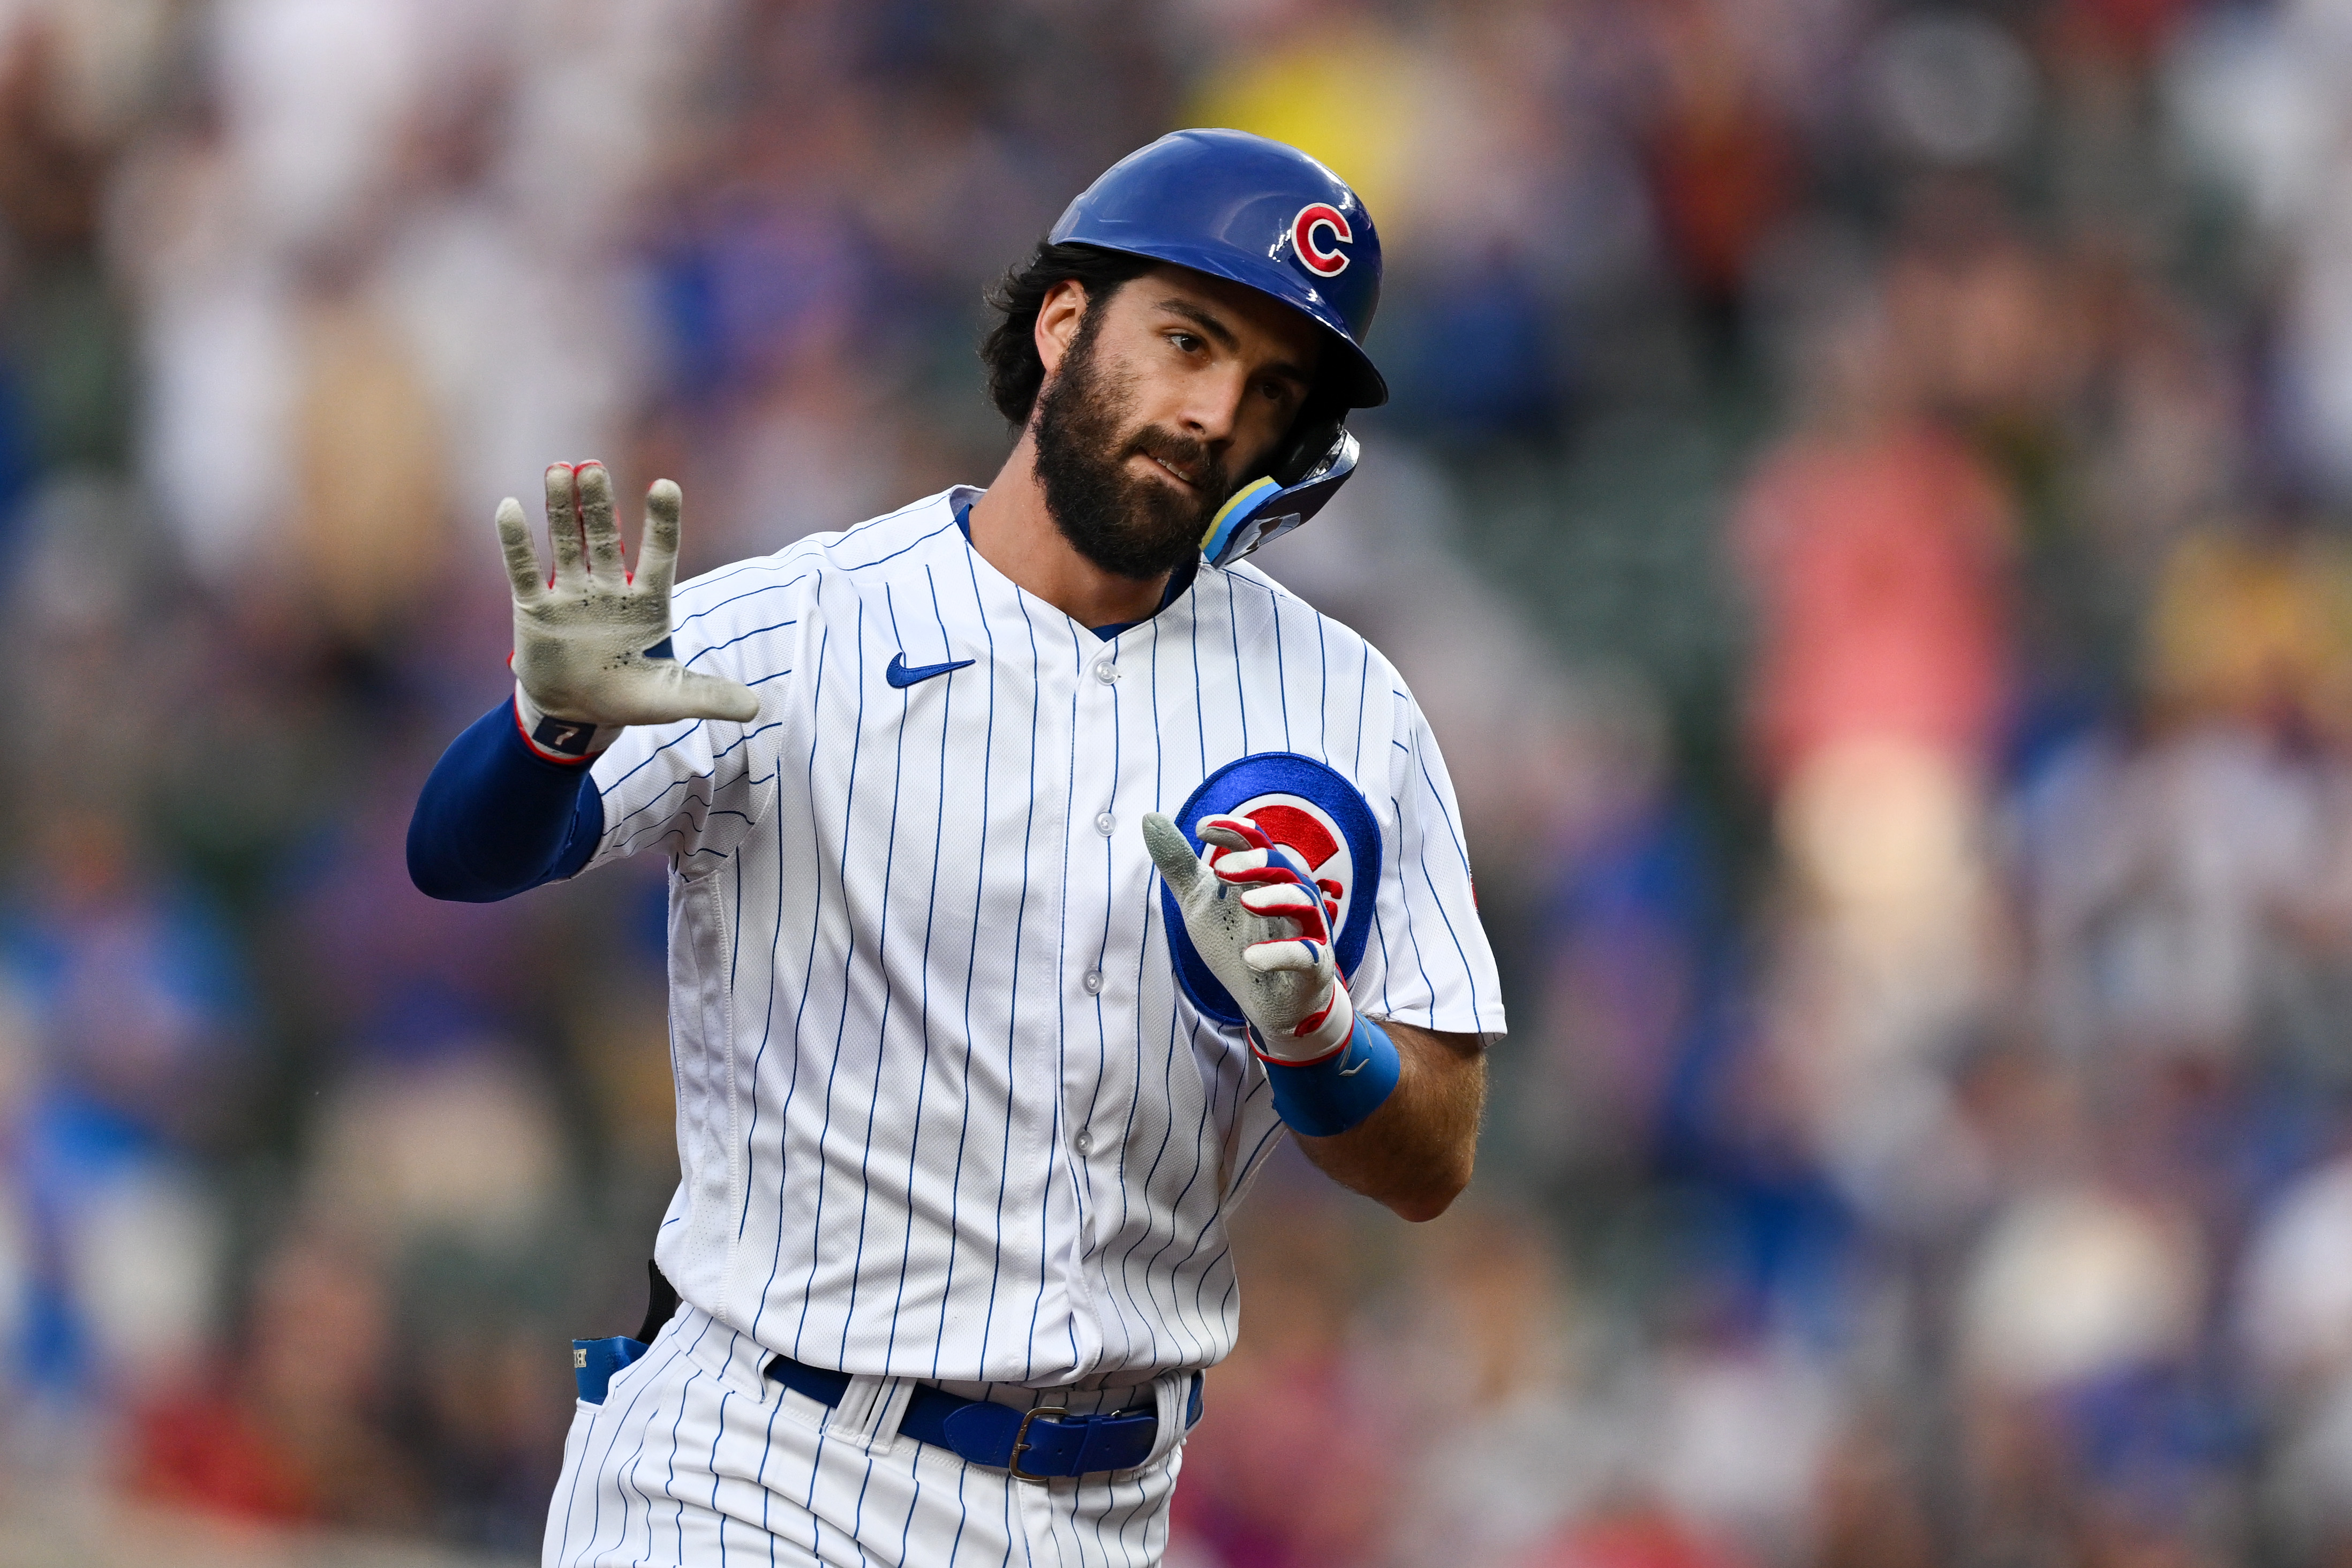 The Best and Worst Uniforms of All Time: The Chicago Cubs - NBC Sports